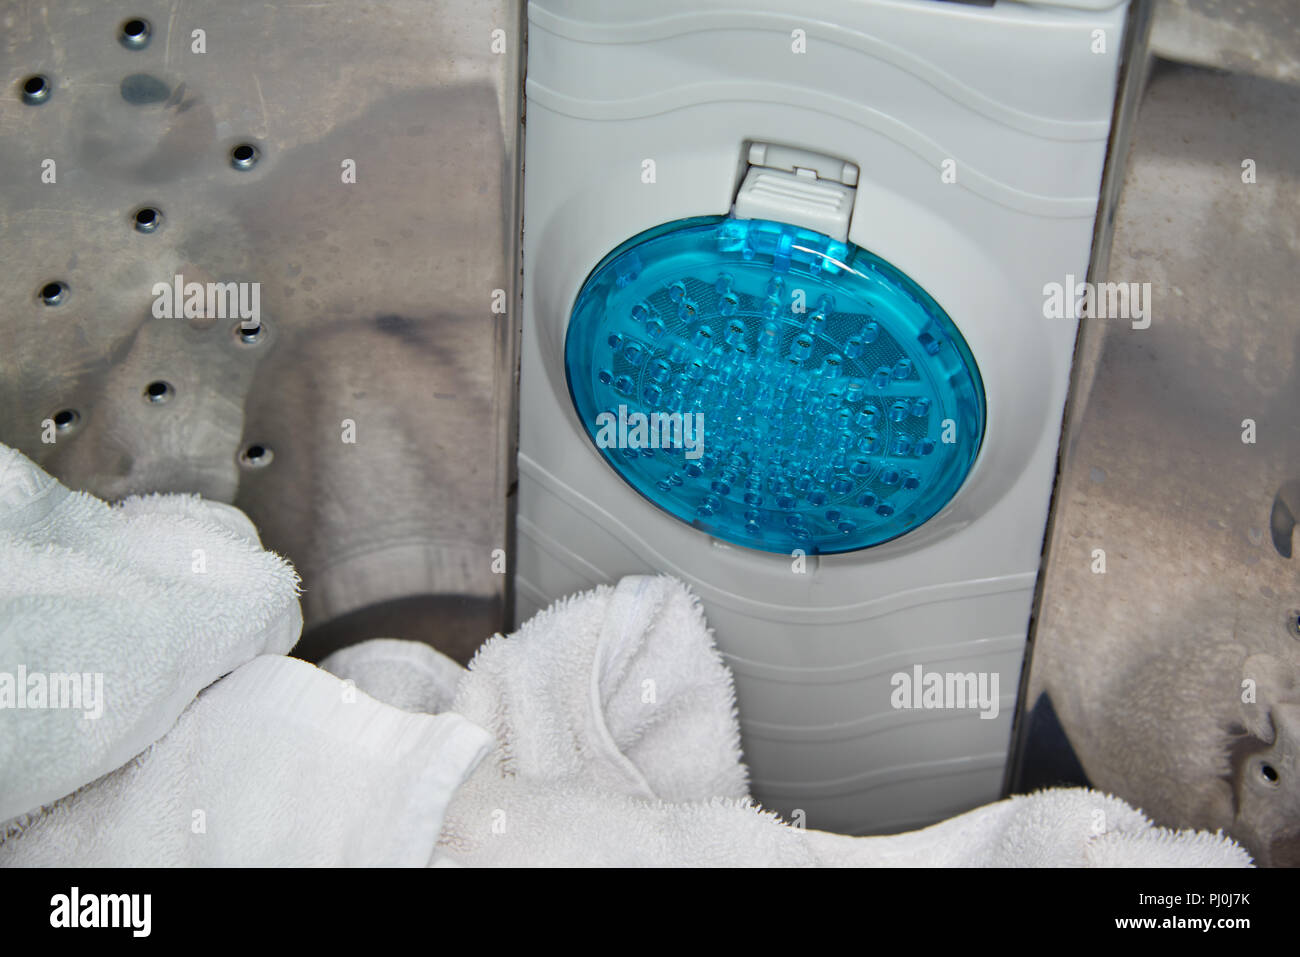 filter for filtering out dust from washing in a top load washer machine Stock Photo